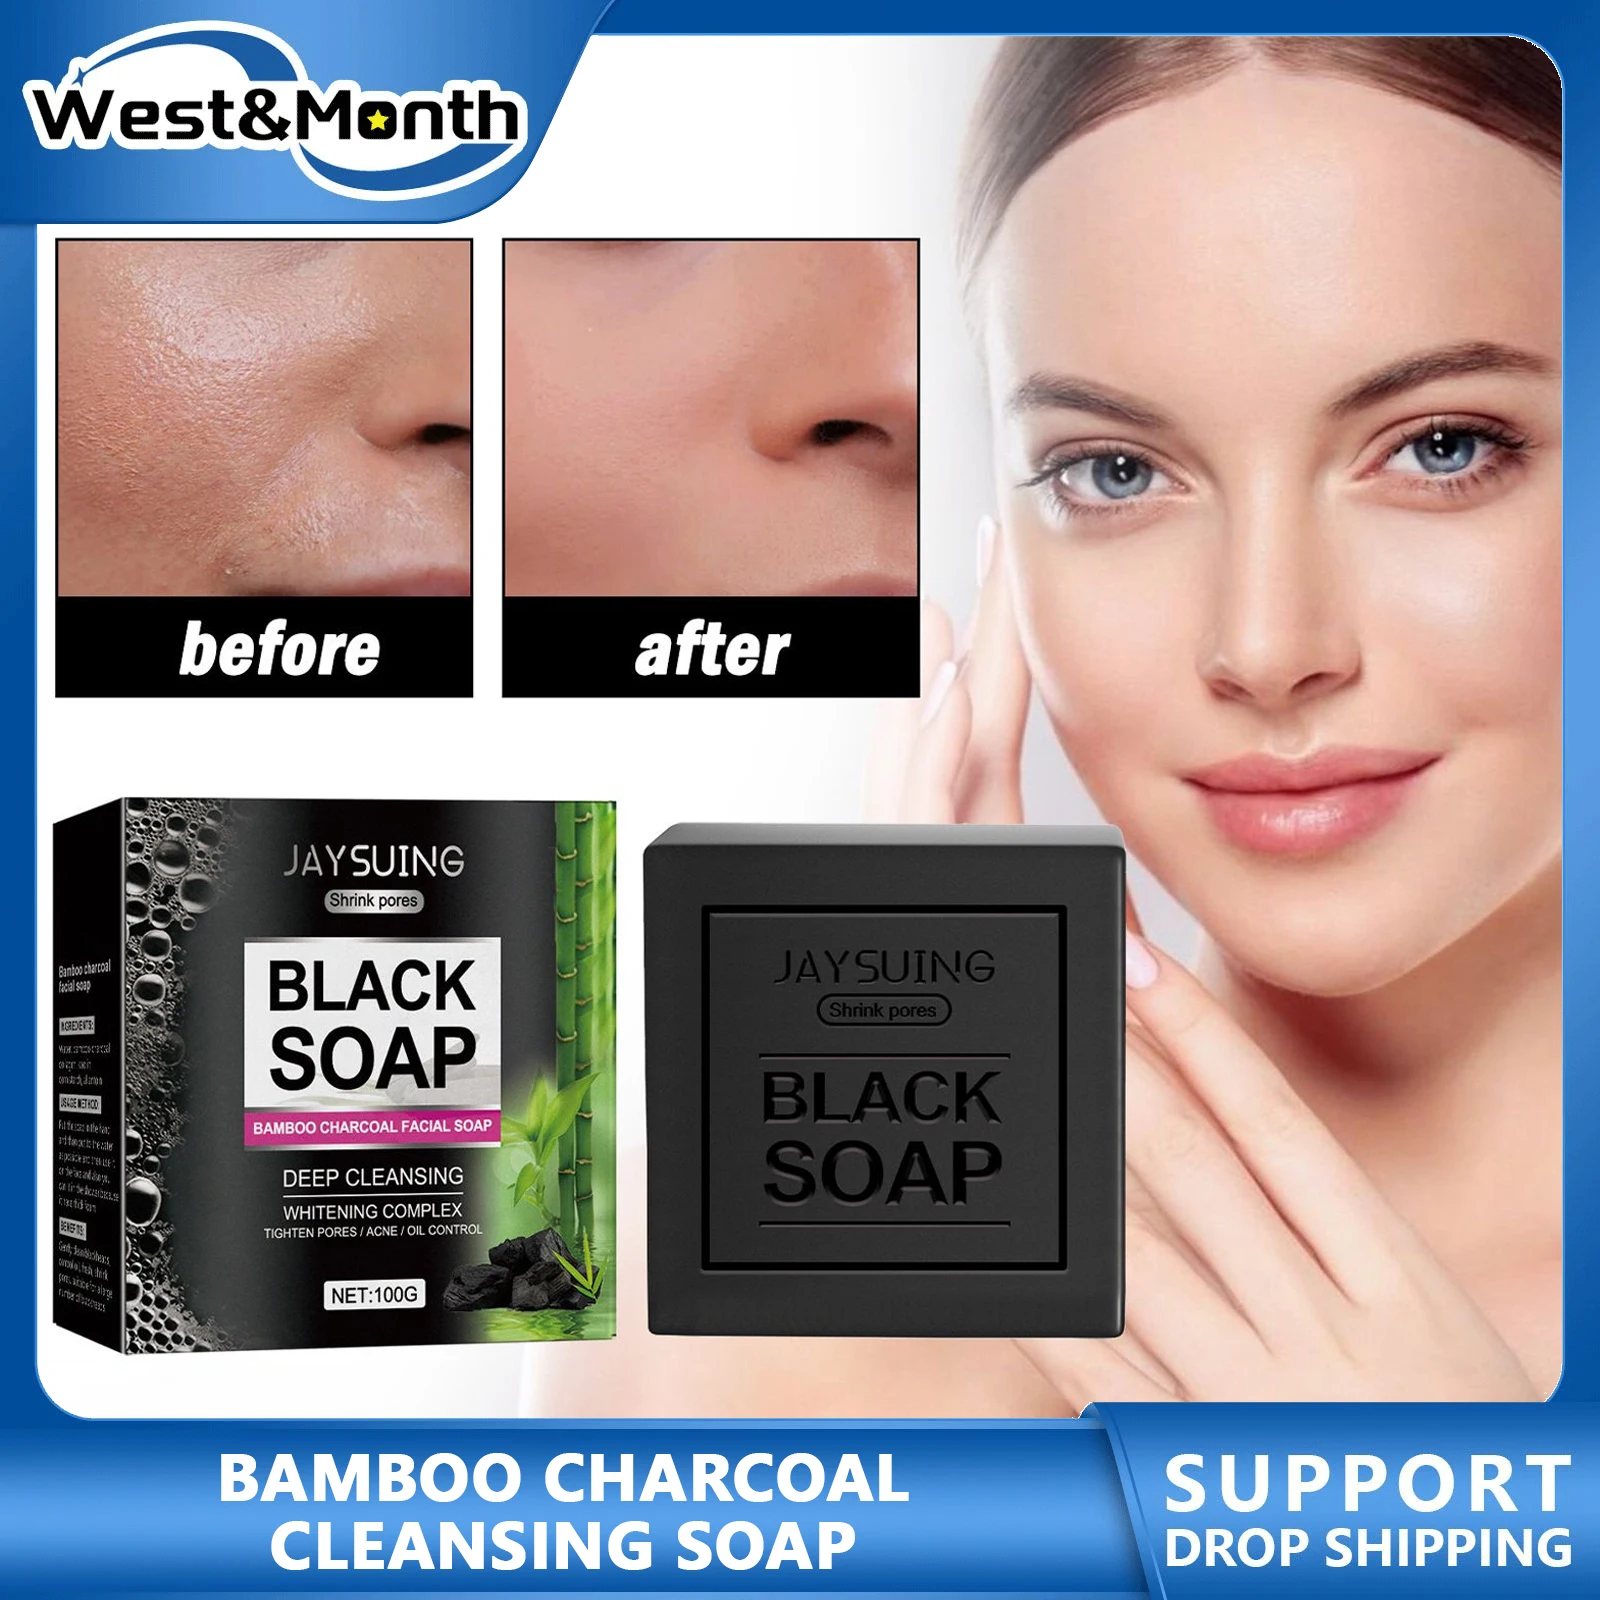 

Bamboo Charcoal Cleansing Soap Shrink Pores Oil Control Acne Blackhead Removal Repair Brighten Skin Deep Moisturizing Face Care